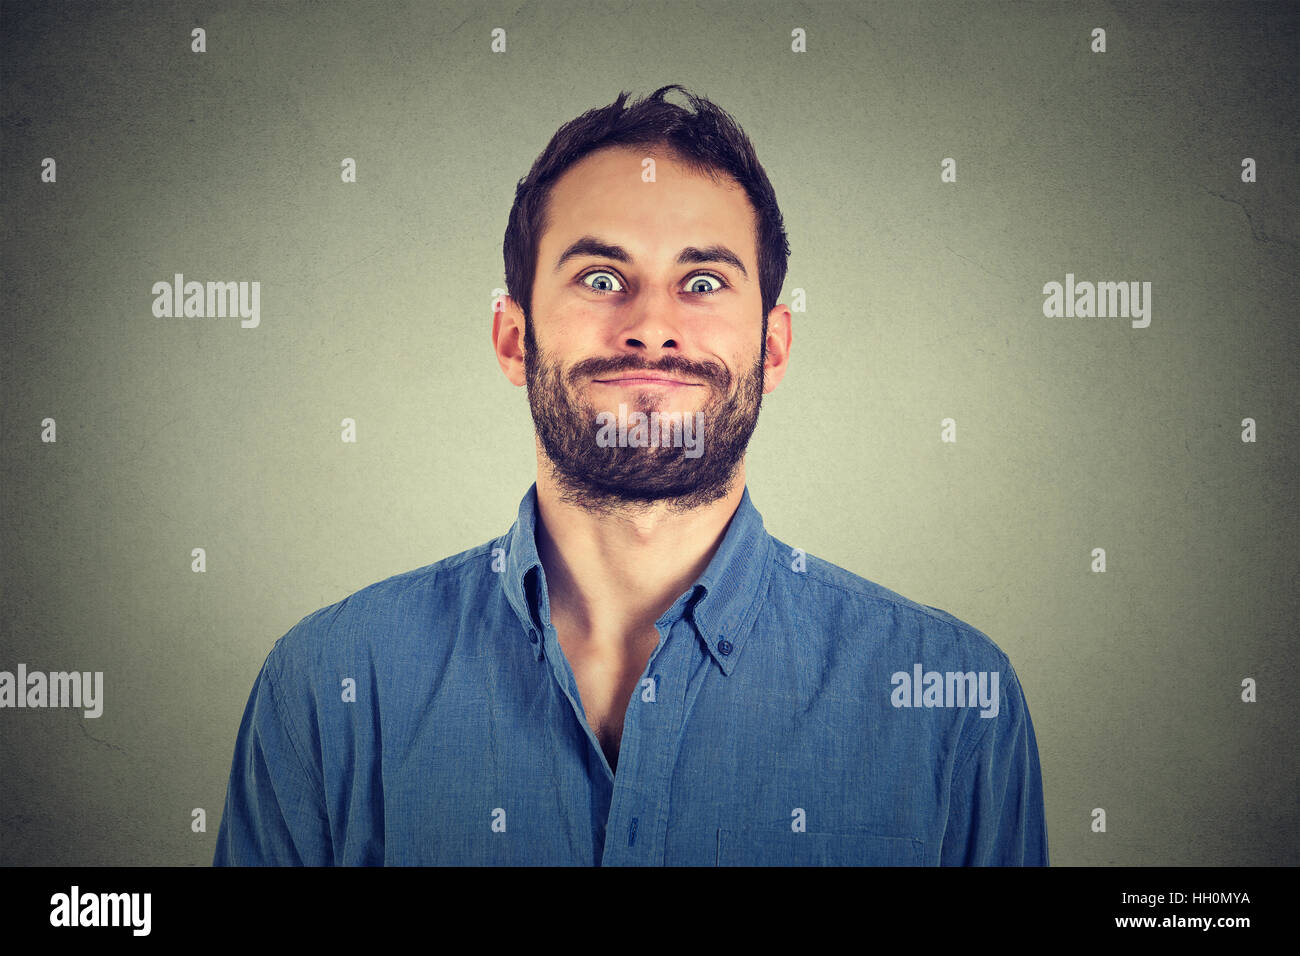 Crazy looking man making funny faces isolated on gray wall background Stock Photo